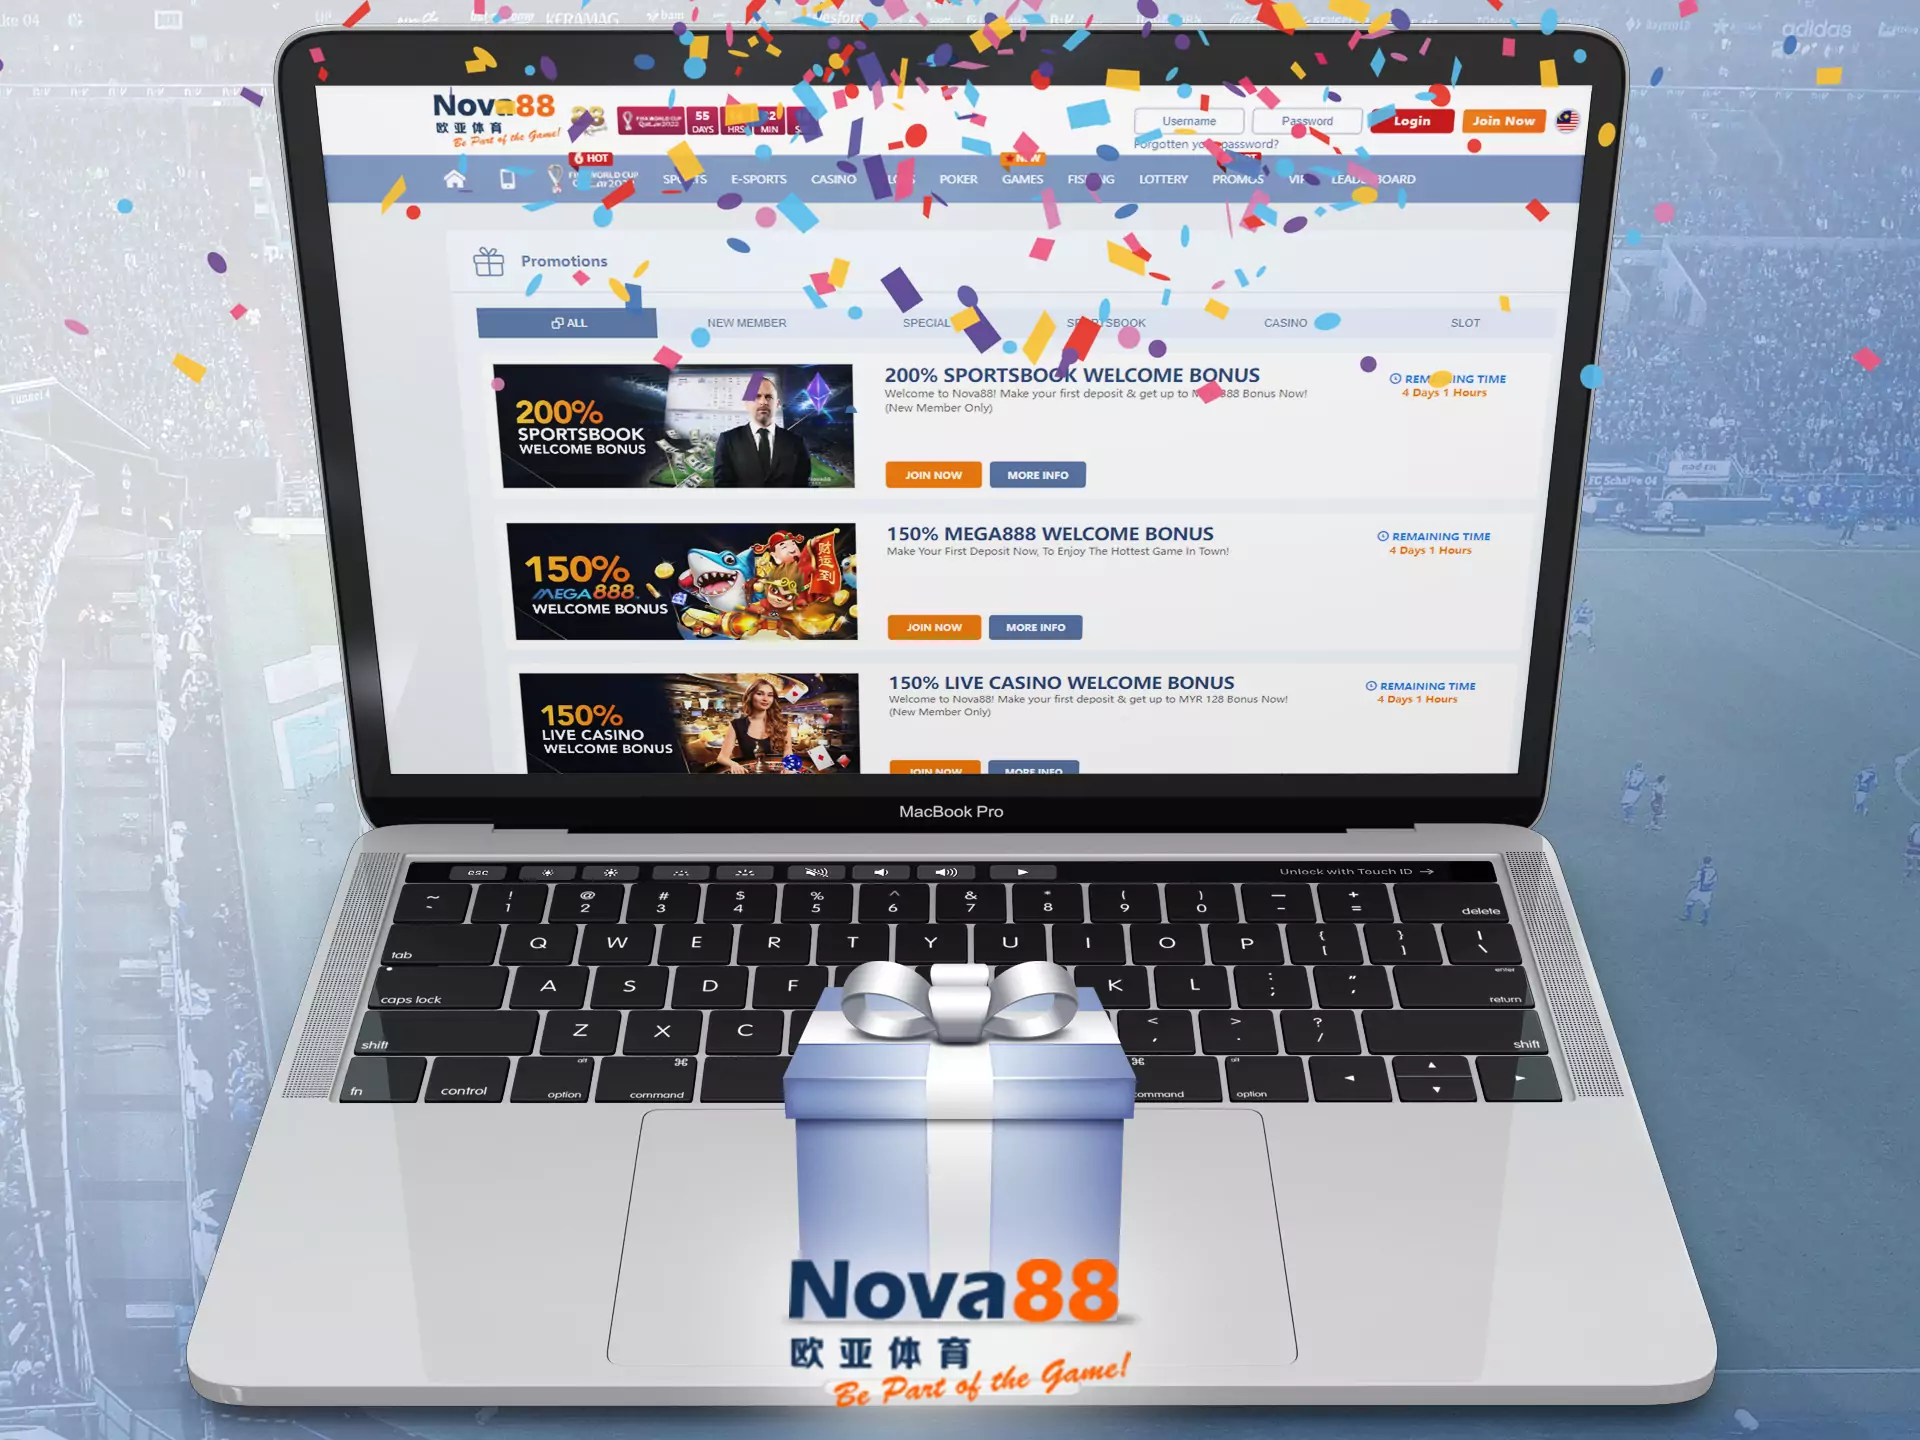 Use promo codes to get complementary bonuses from Nova88.